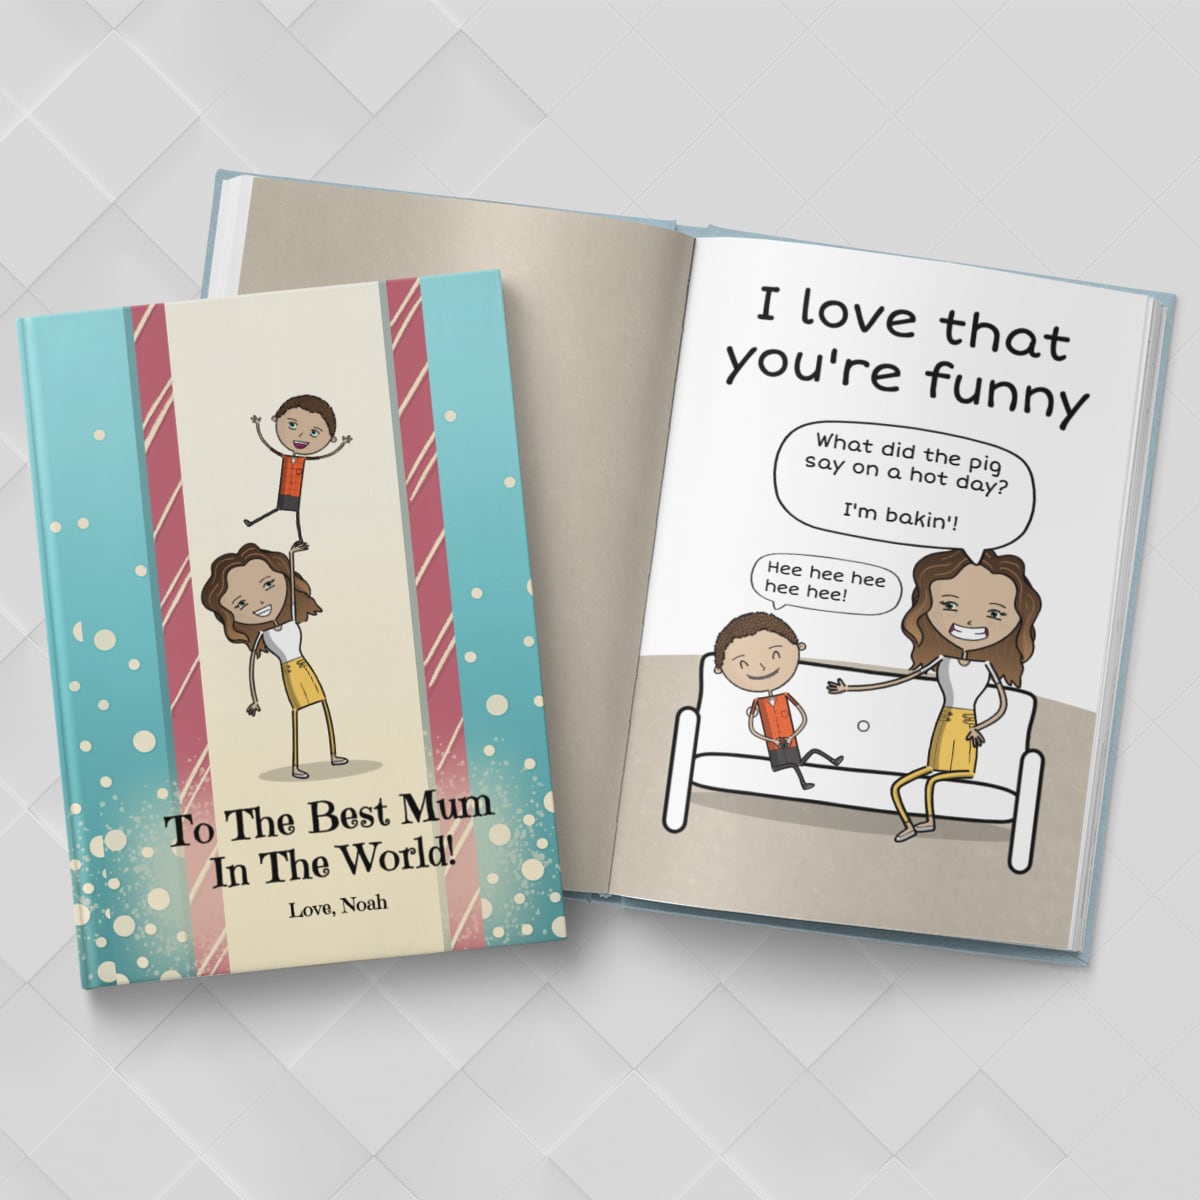 The Unique Personalized Gift Book That Says Why You Love Them | LoveBook Online - 0